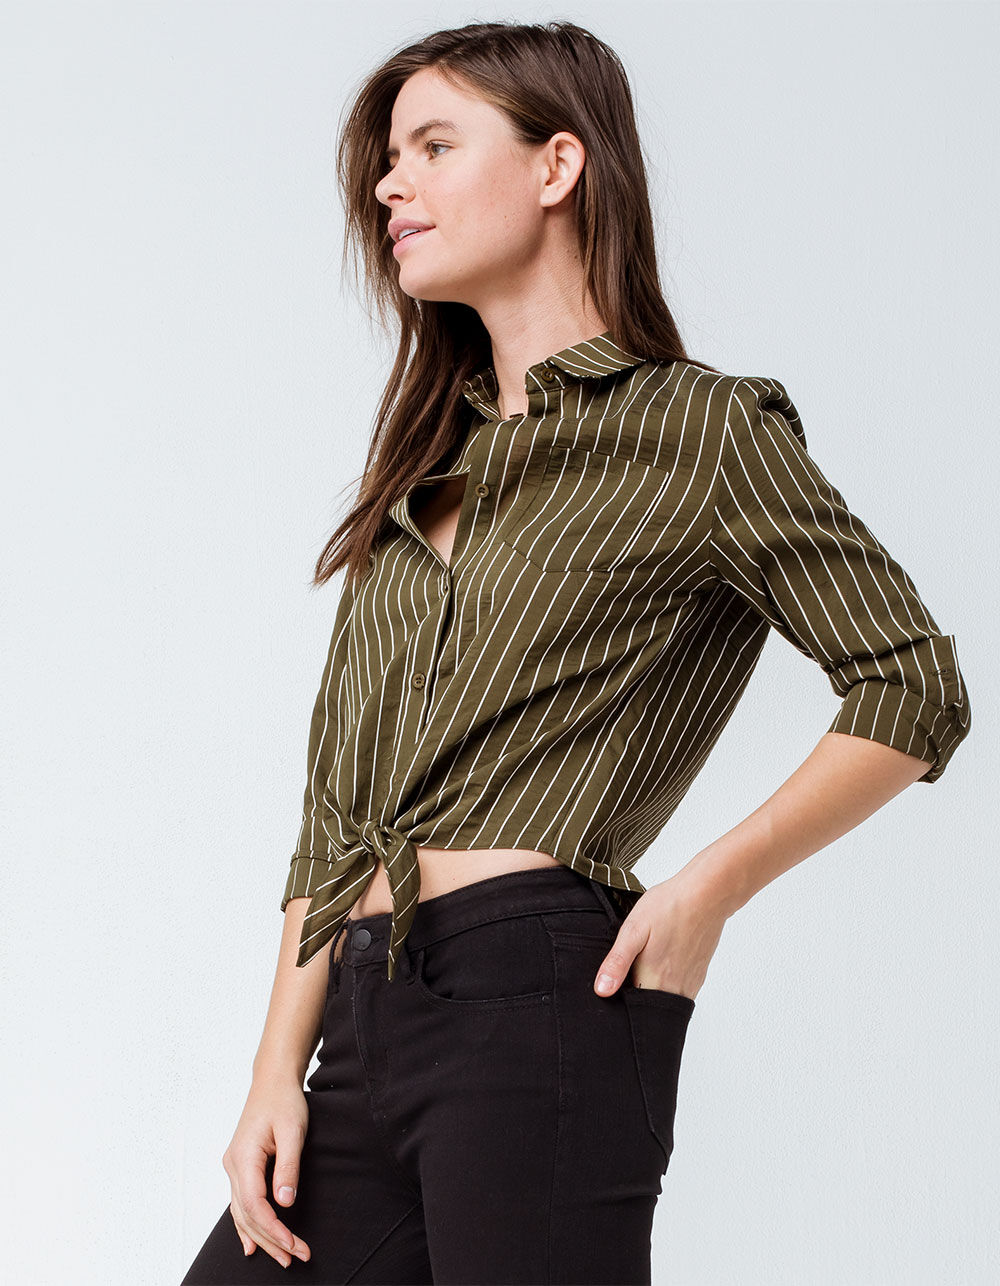 SKY AND SPARROW Stripe Button Olive Womens Tie Front Top - OLIVE | Tillys